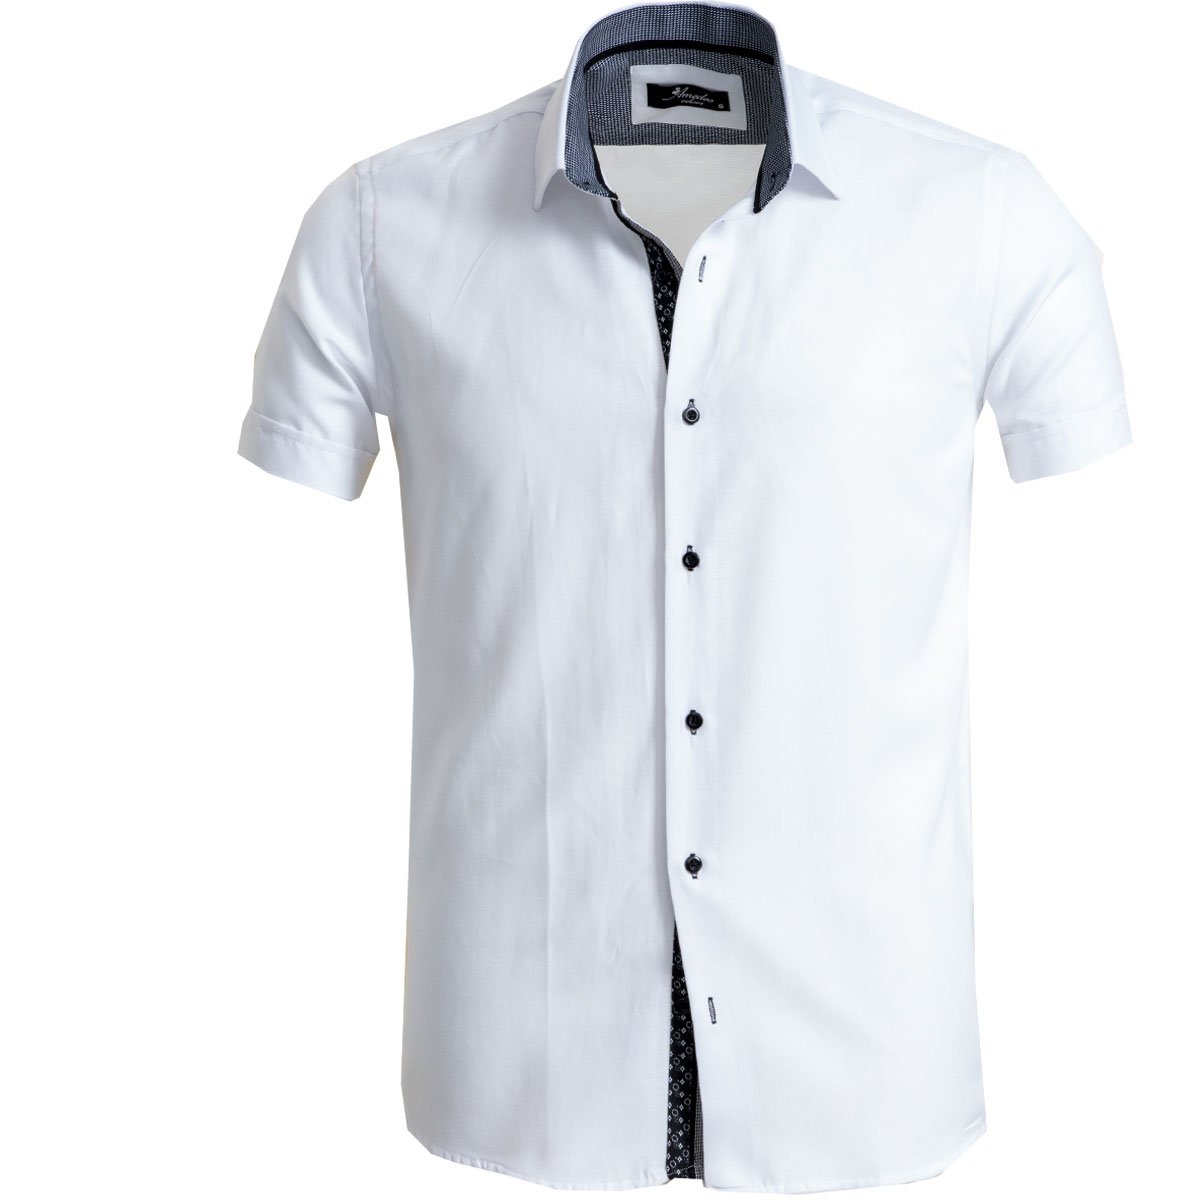 Solid White Mens Short Sleeve Button up Shirts - Tailored Slim Fit – Amedeo  Exclusive